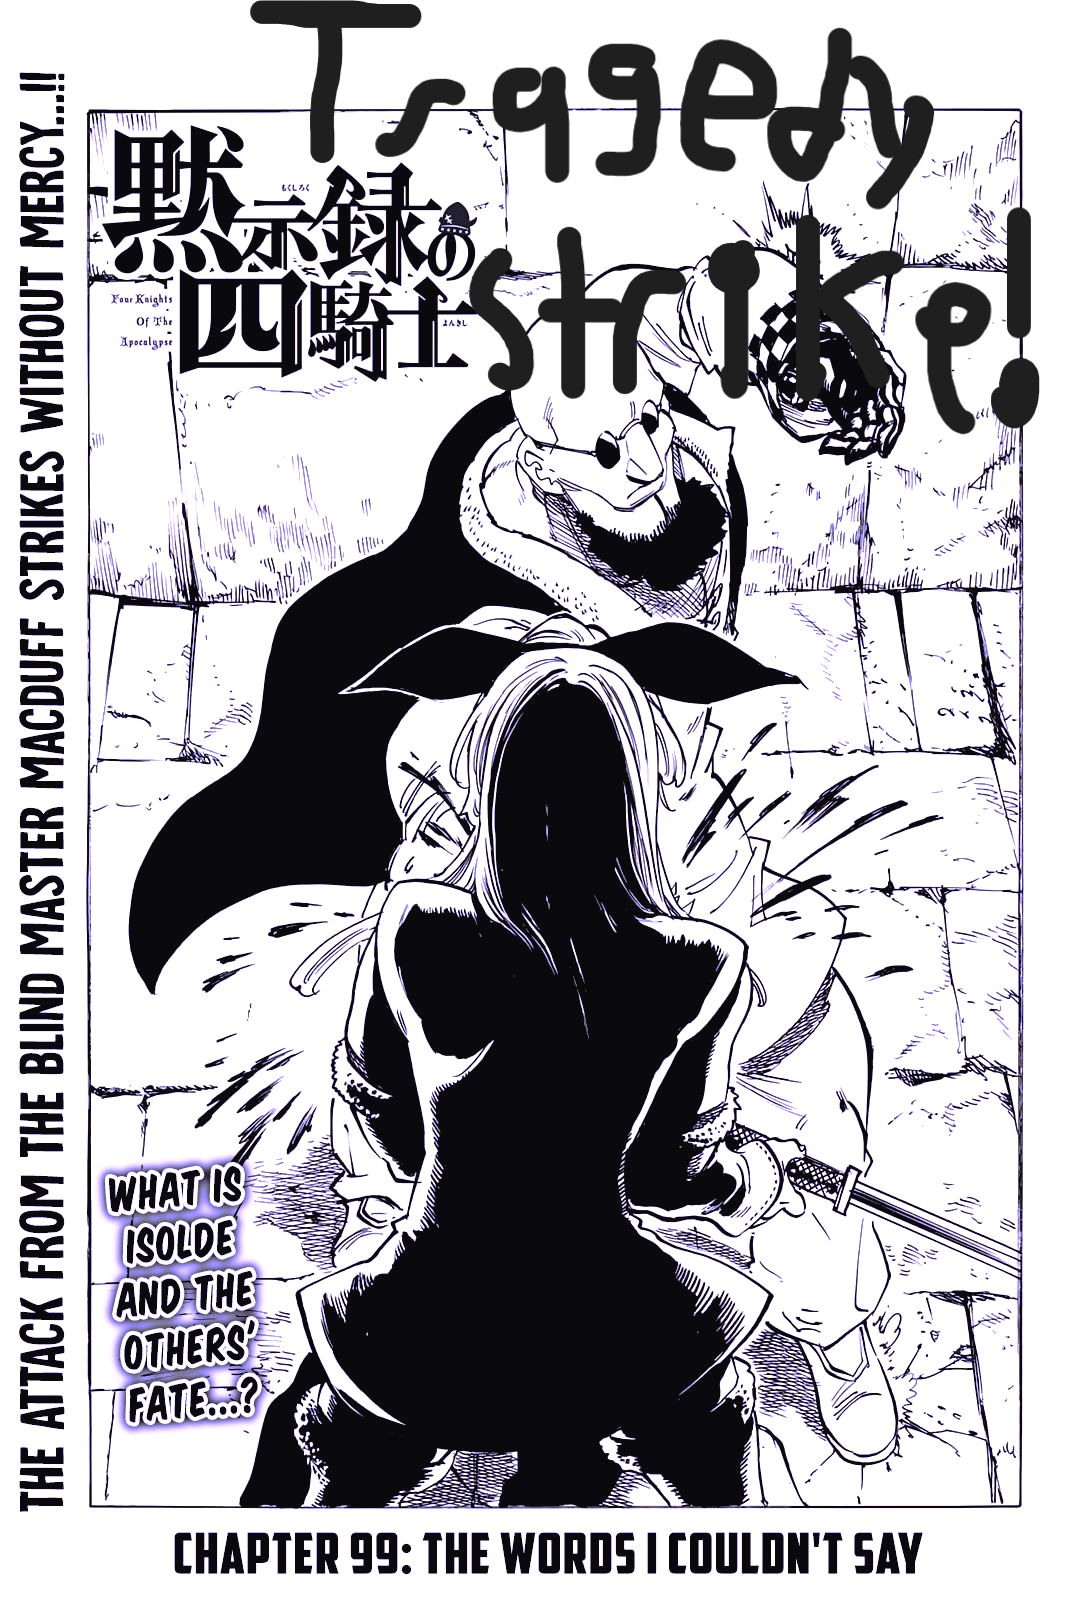 The Princess, Her Knight, And The Awakening of The Supreme Queen. Four Knights Of The Apocalypse Chapter 99 BREAKDOWN